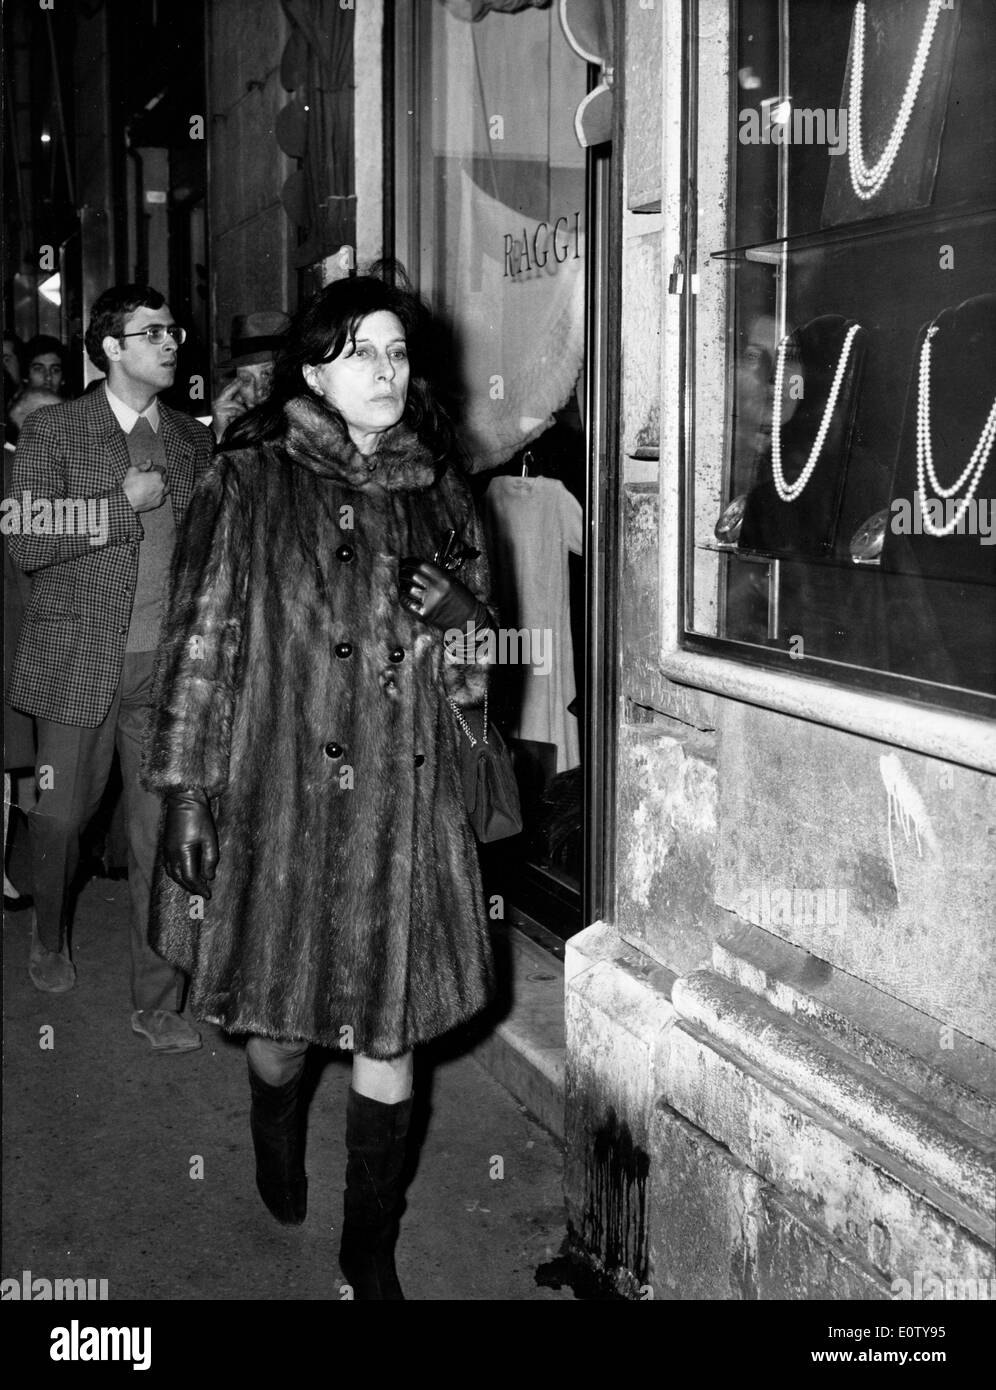 Actress Anna Magnani shops in Italy Stock Photo